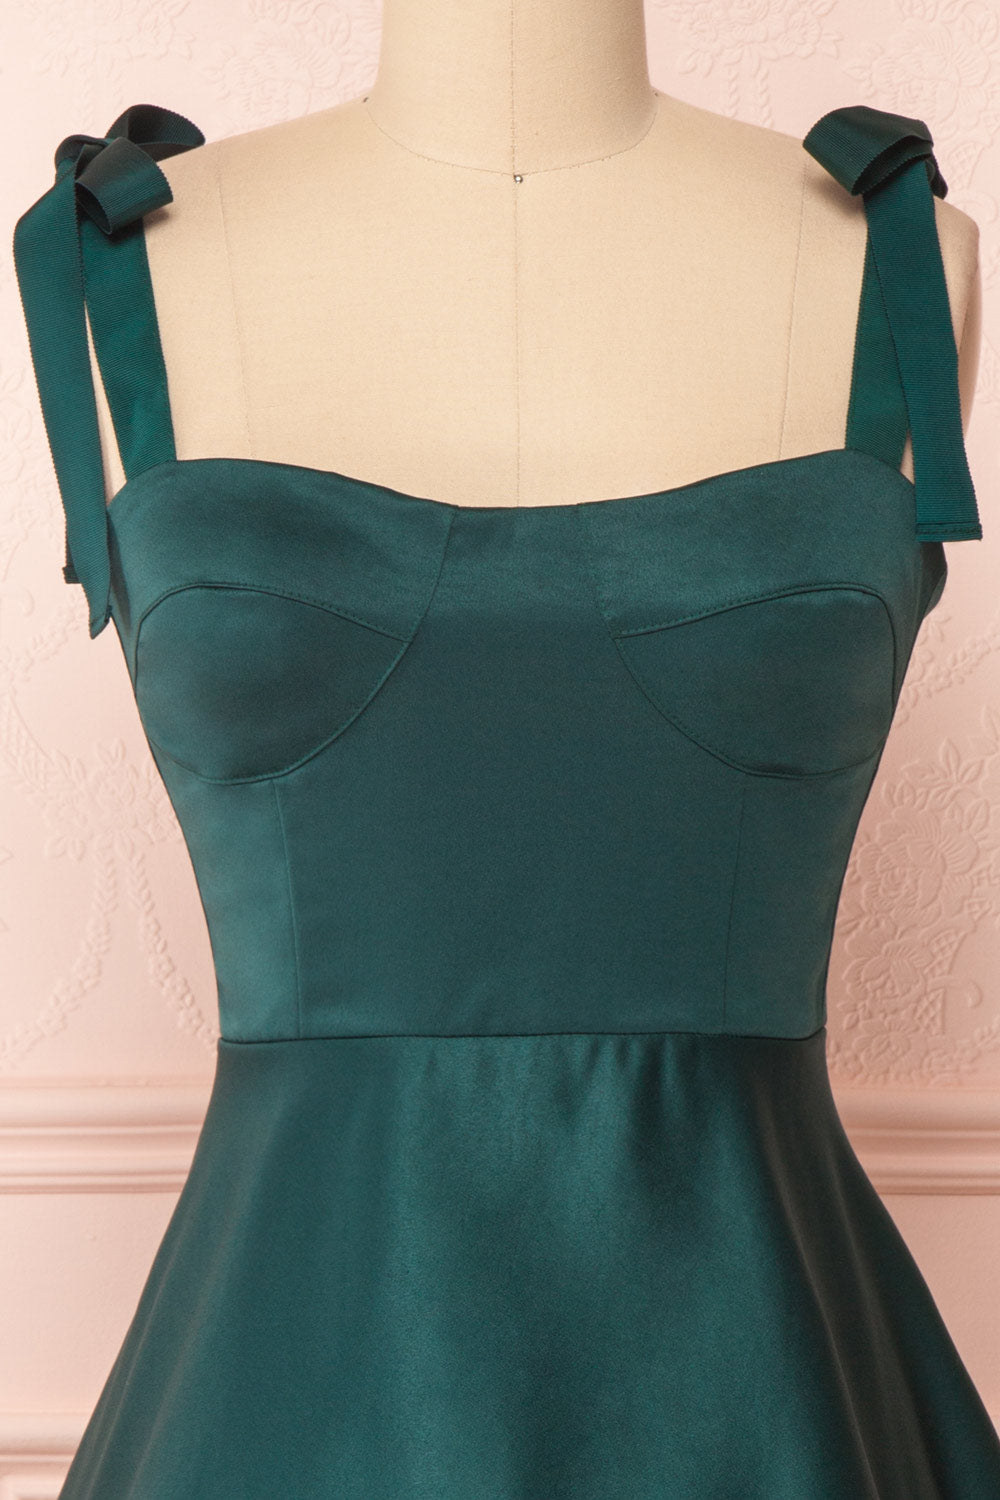 Angelina Emerald Green Satin A-Line Party Dress | Boutique 1861 front close-up